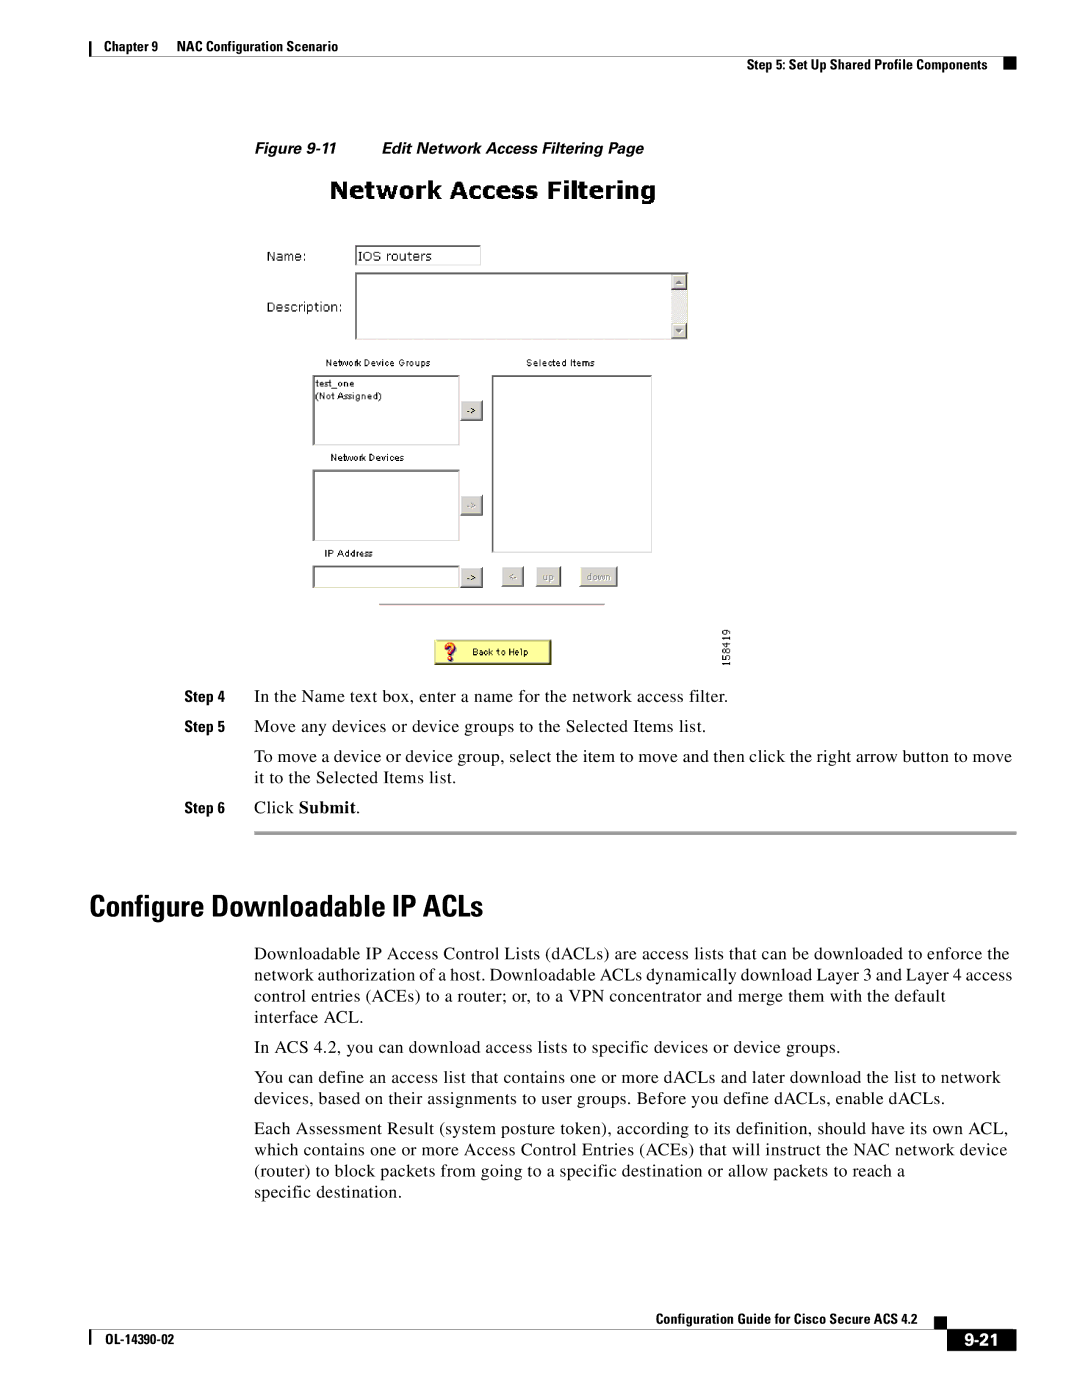 Cisco Systems 4.2 manual Configure Downloadable IP ACLs, Edit Network Access Filtering 